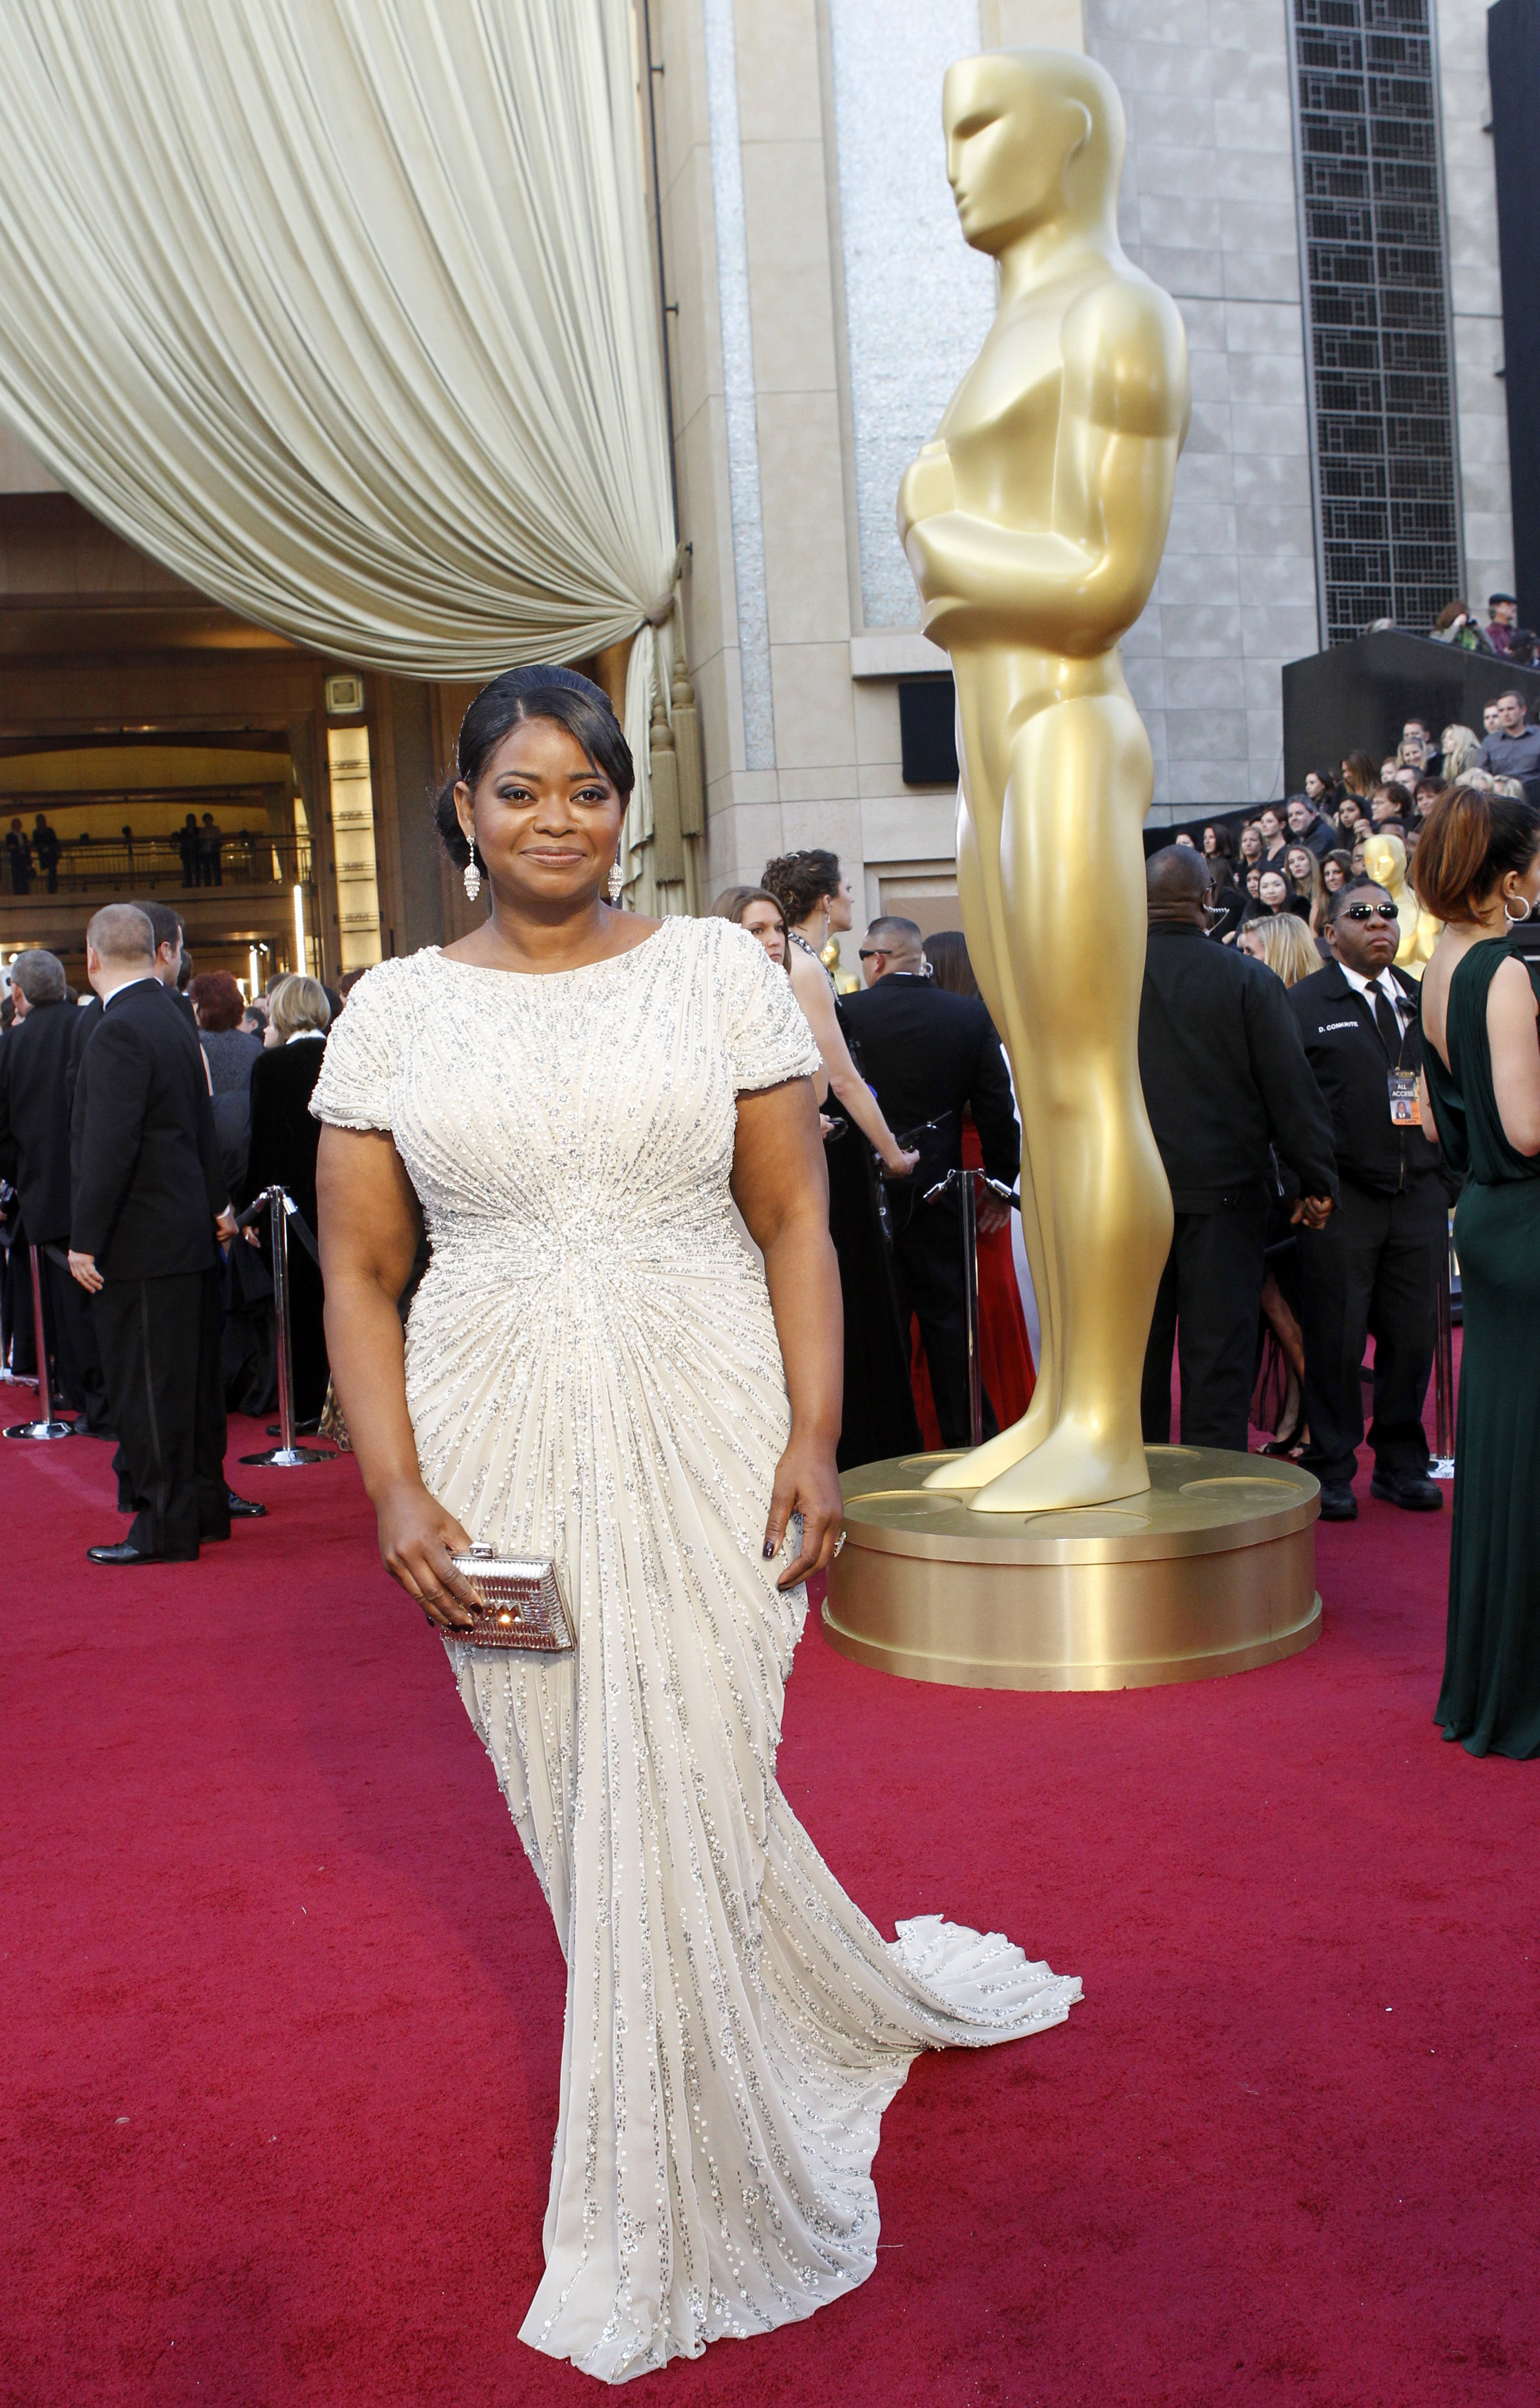 Octavia Spencer wearing a white sparkly gown with t-shirt-like sleeves and a long train